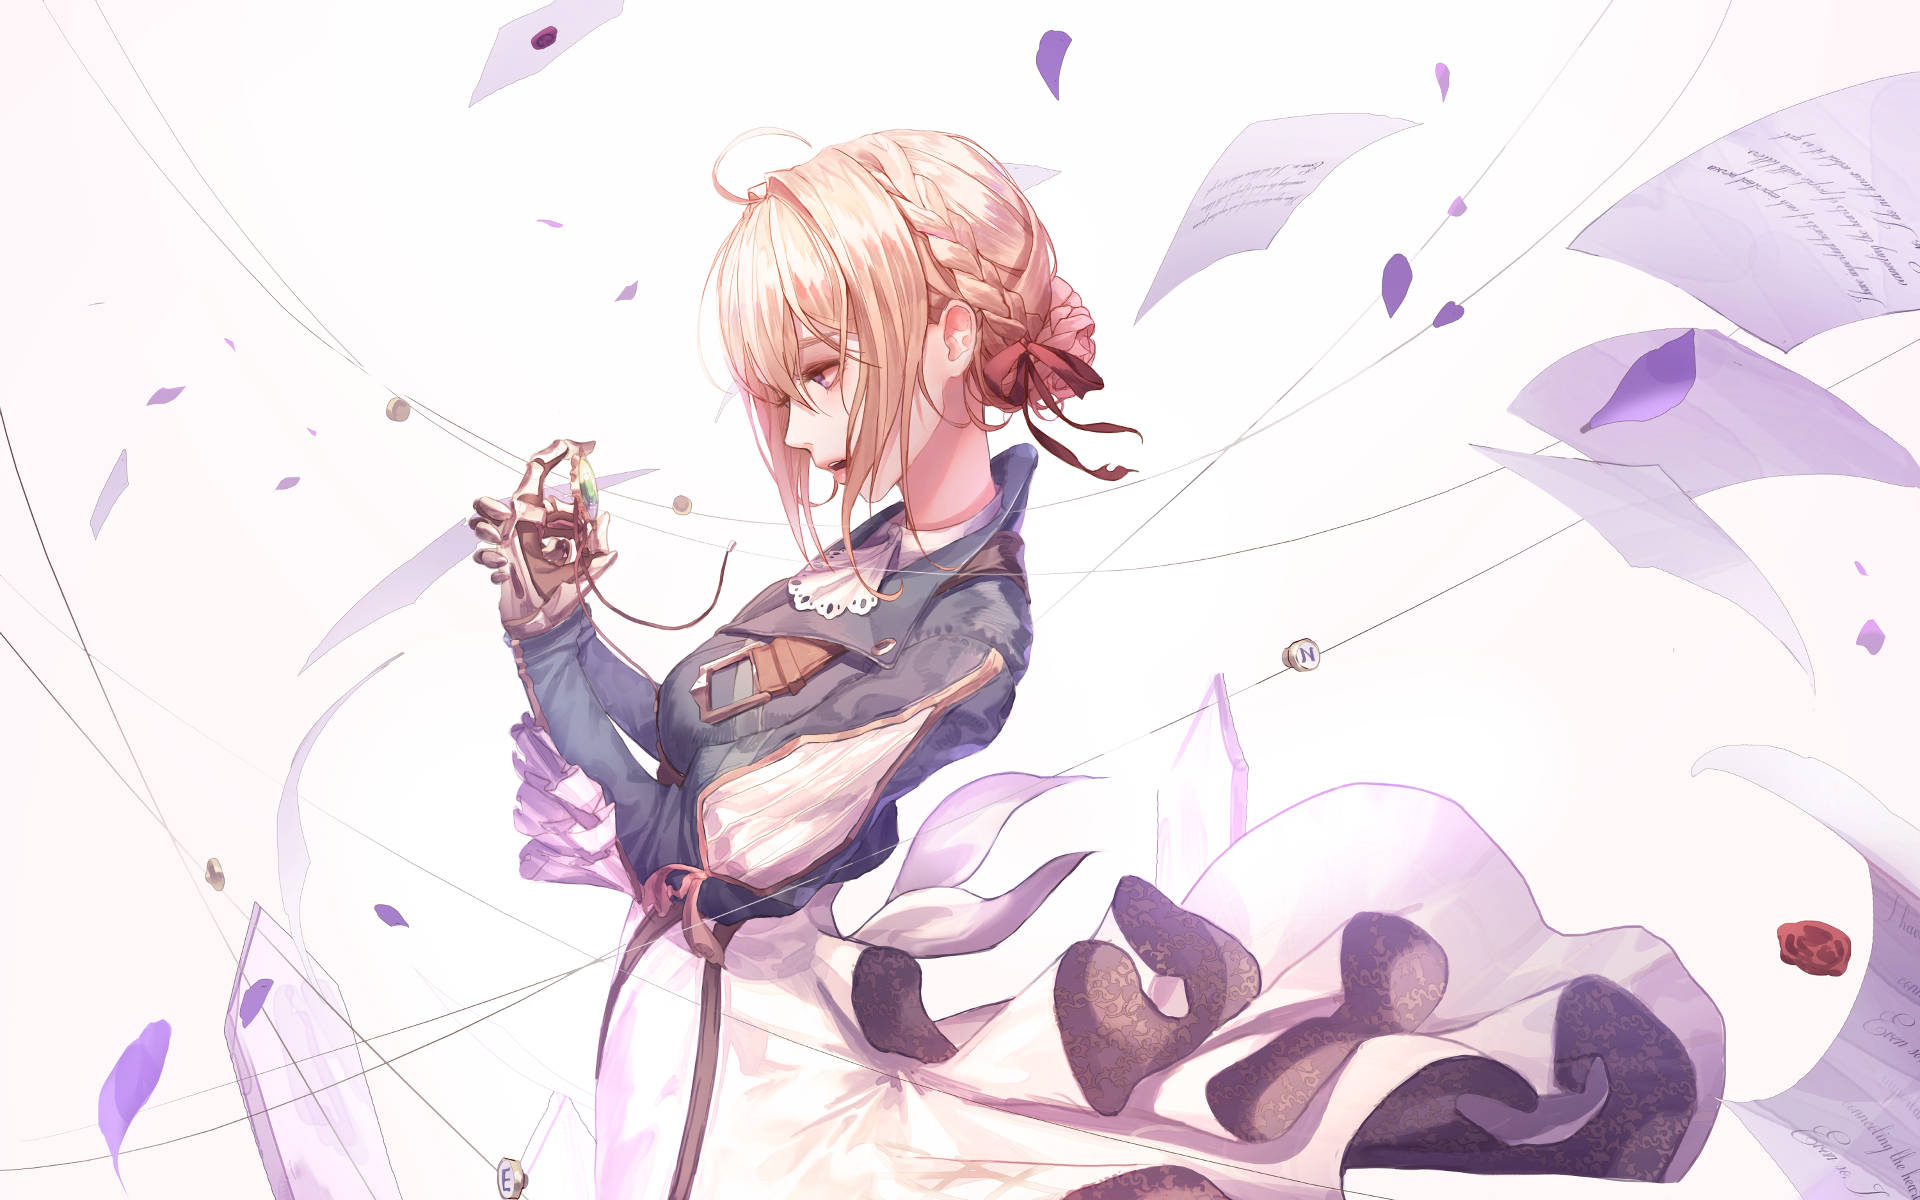 Violet Evergarden Releases a Colorful Explosion of Paper Petals Wallpaper